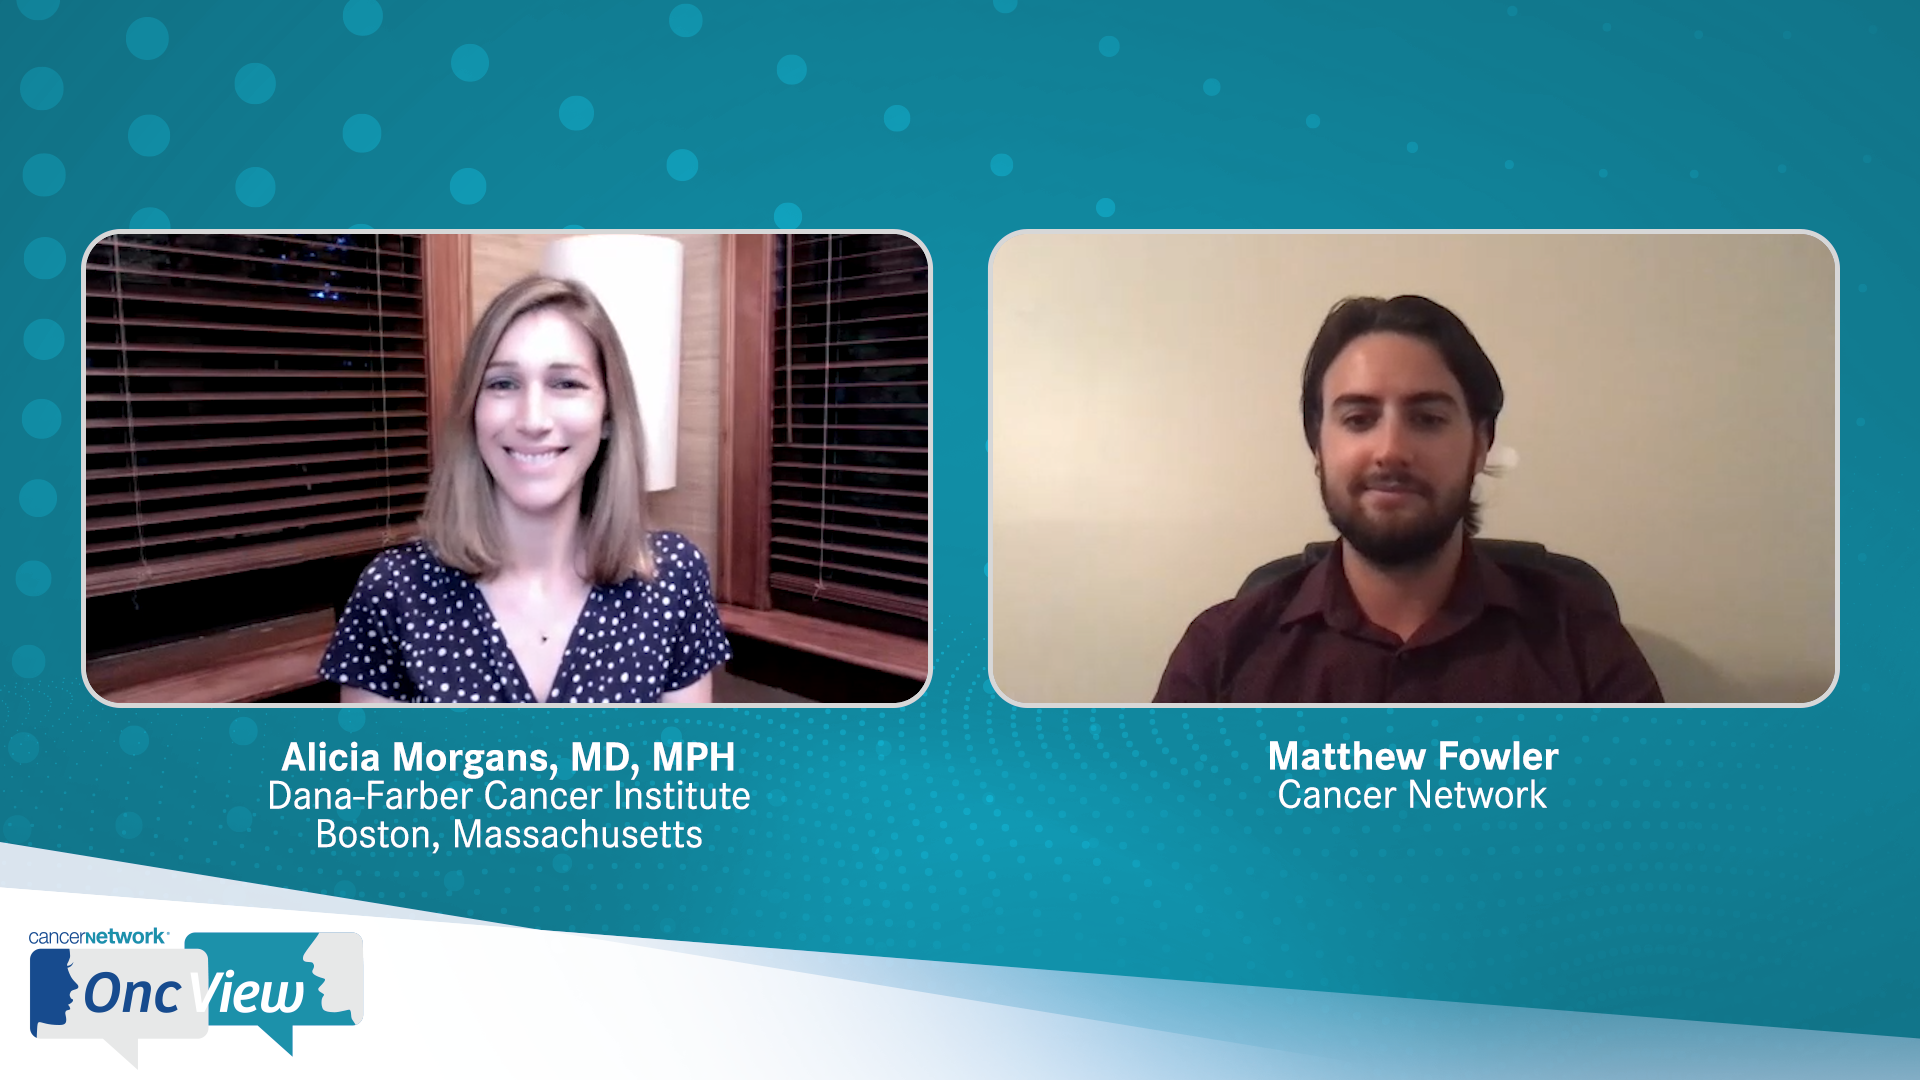 Patient Access and Metastatic Prostate Cancer Therapy